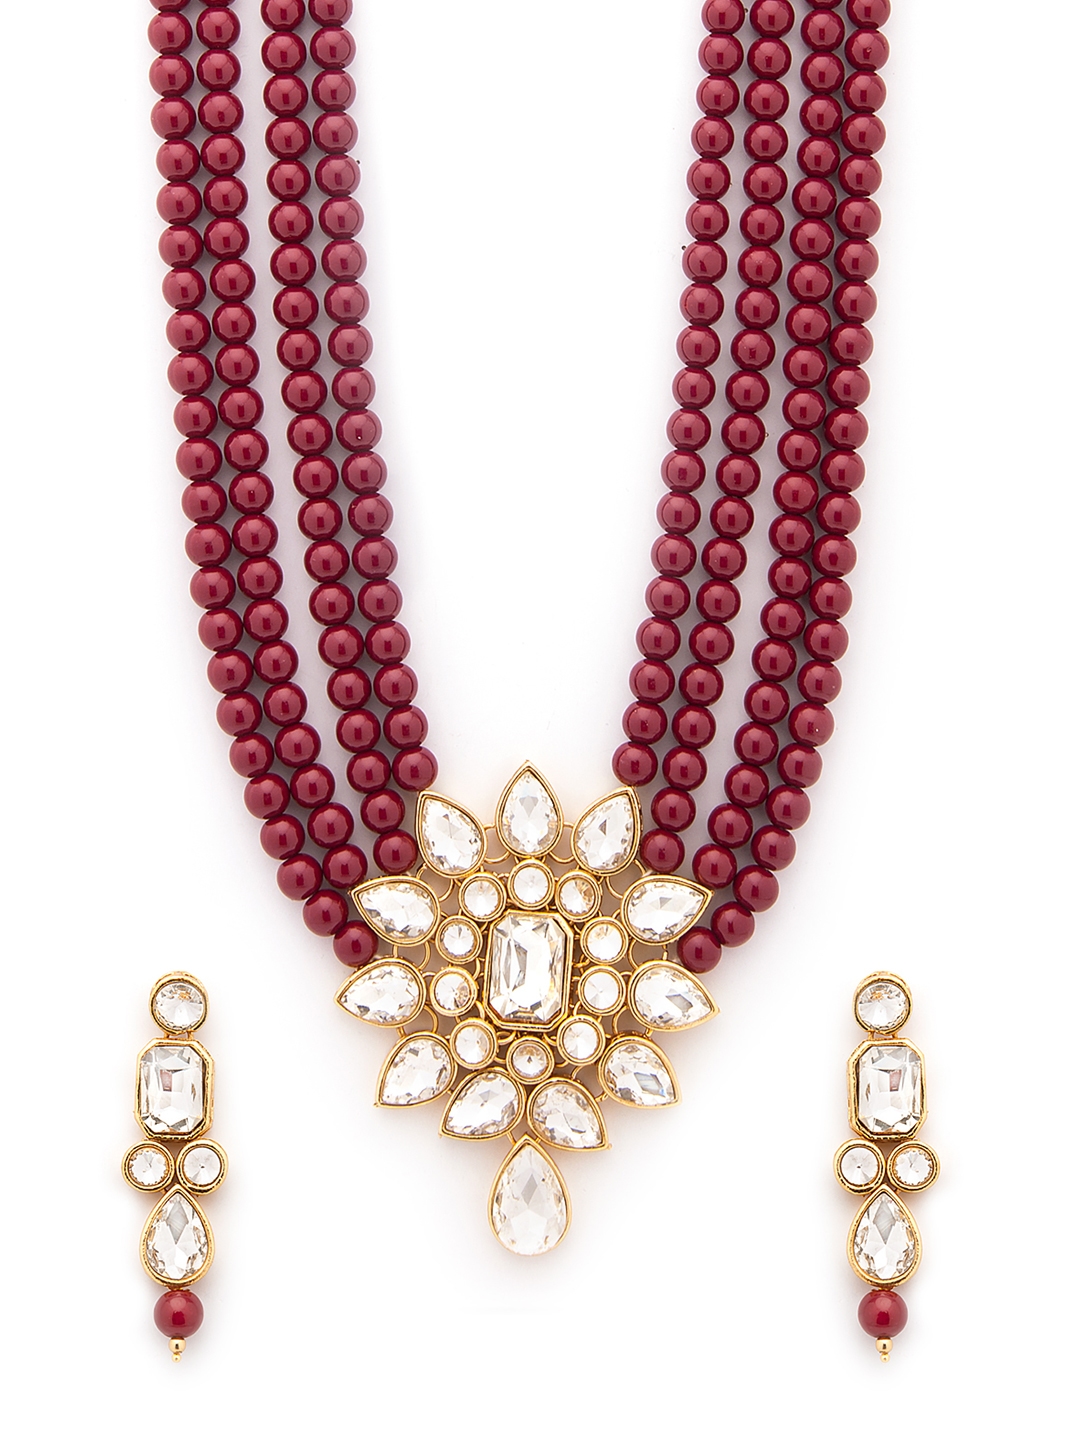 Buy Gold Plated Jewellery Light Weight Gold Beads Long Chain Designs